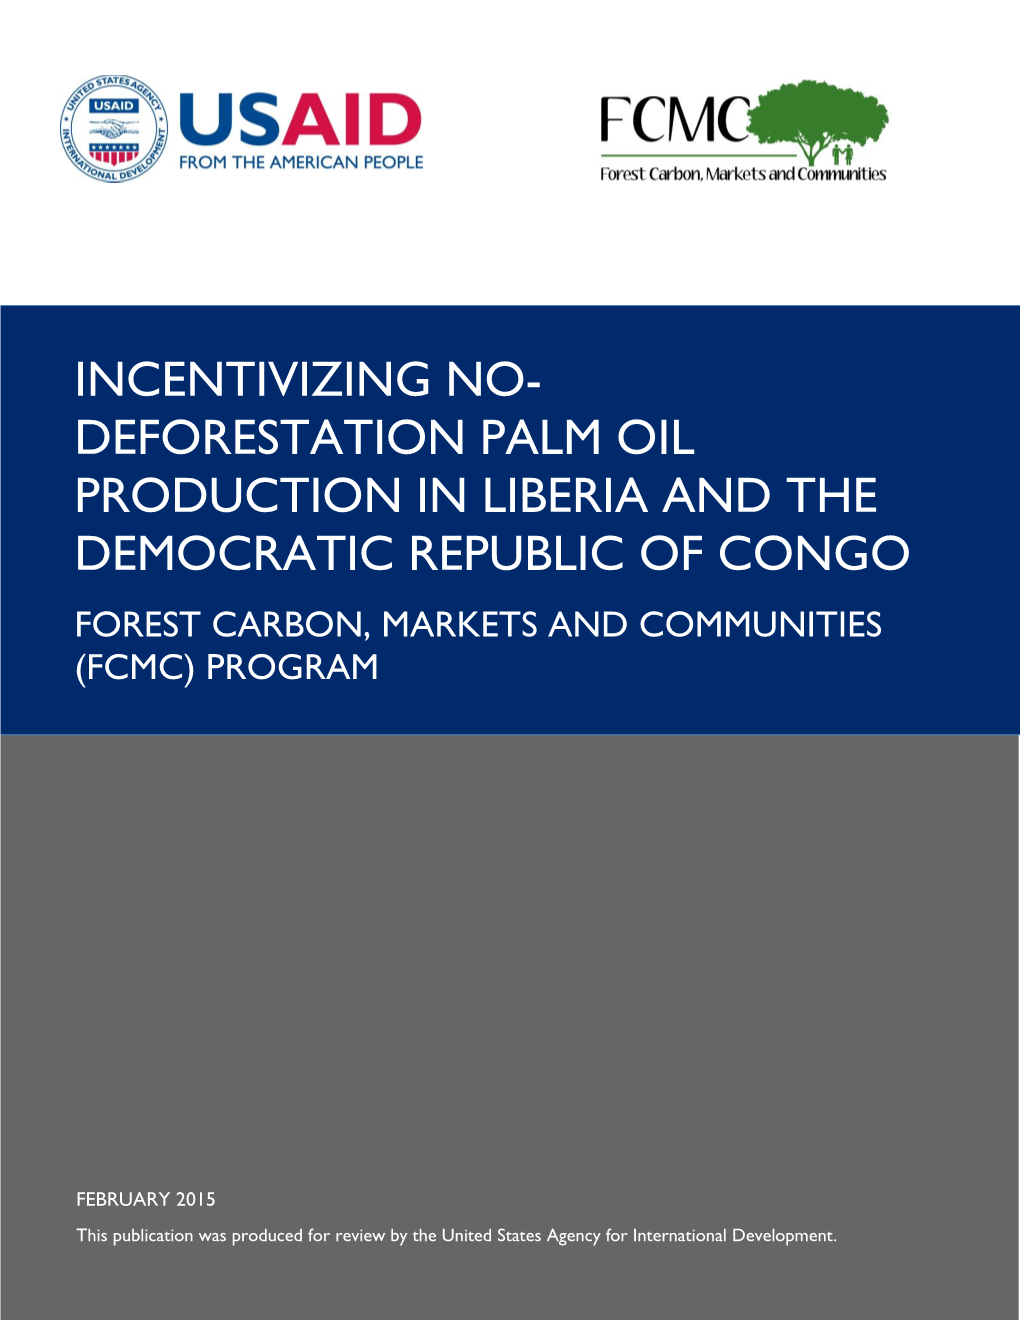 Deforestation Palm Oil Production in Liberia and the Democratic Republic of Congo Forest Carbon, Markets and Communities (Fcmc) Program